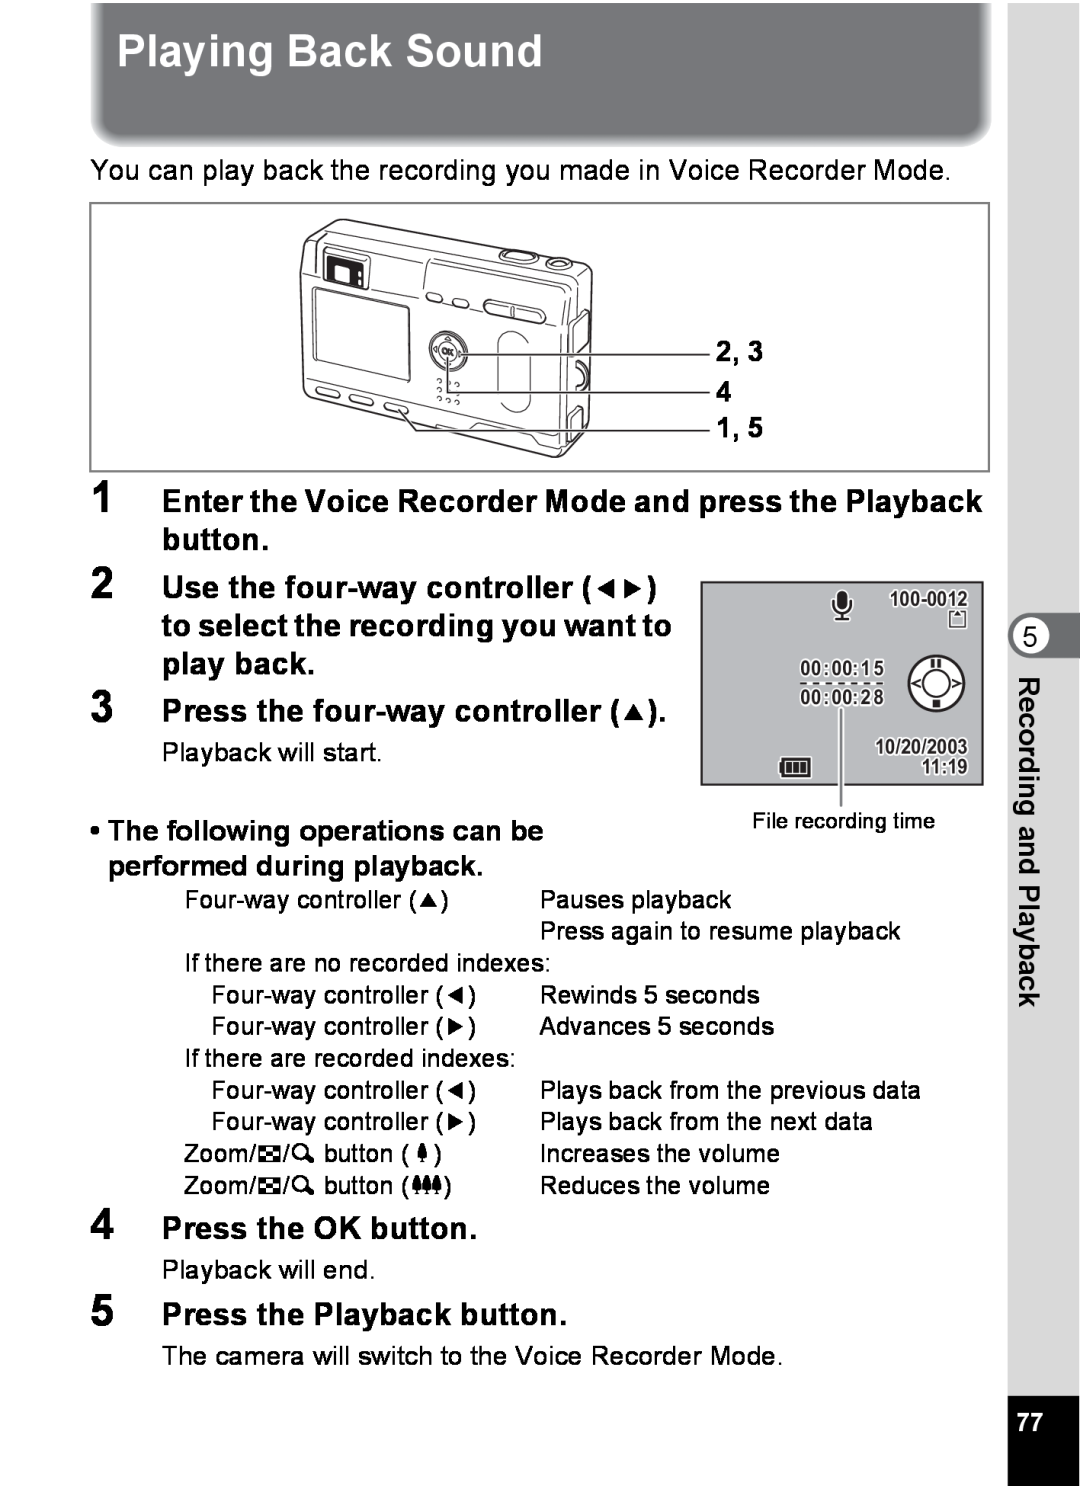 Pentax S4 Playing Back Sound, Enter the Voice Recorder Mode and press the Playback button, Press the OK button, 2, 3 4 1 